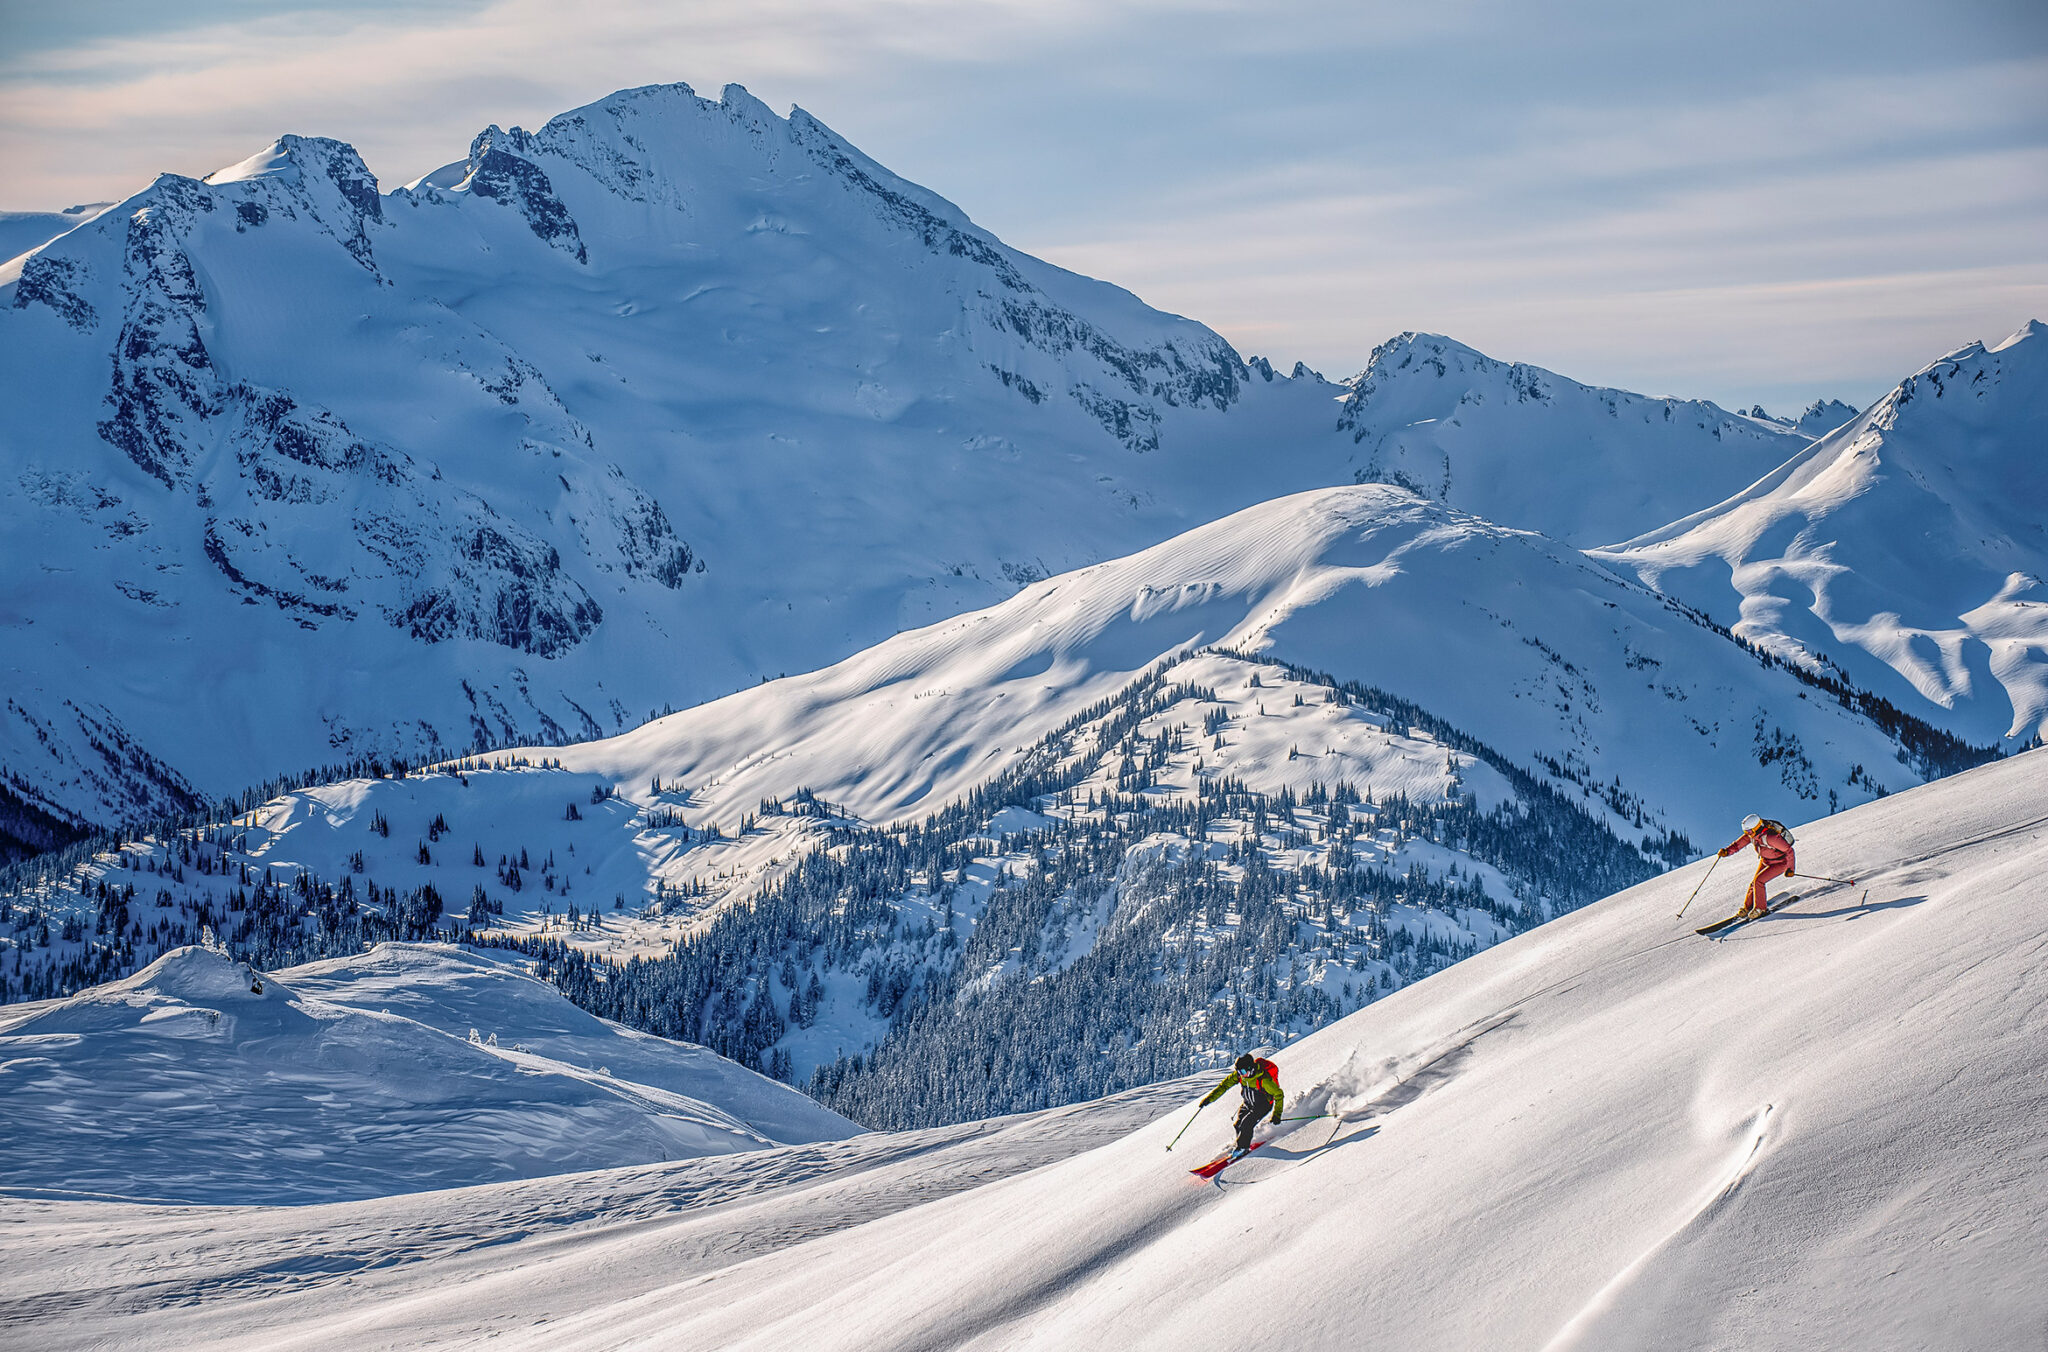 Two skiers make their way down a snowy slope on Whistler Blackcomb.